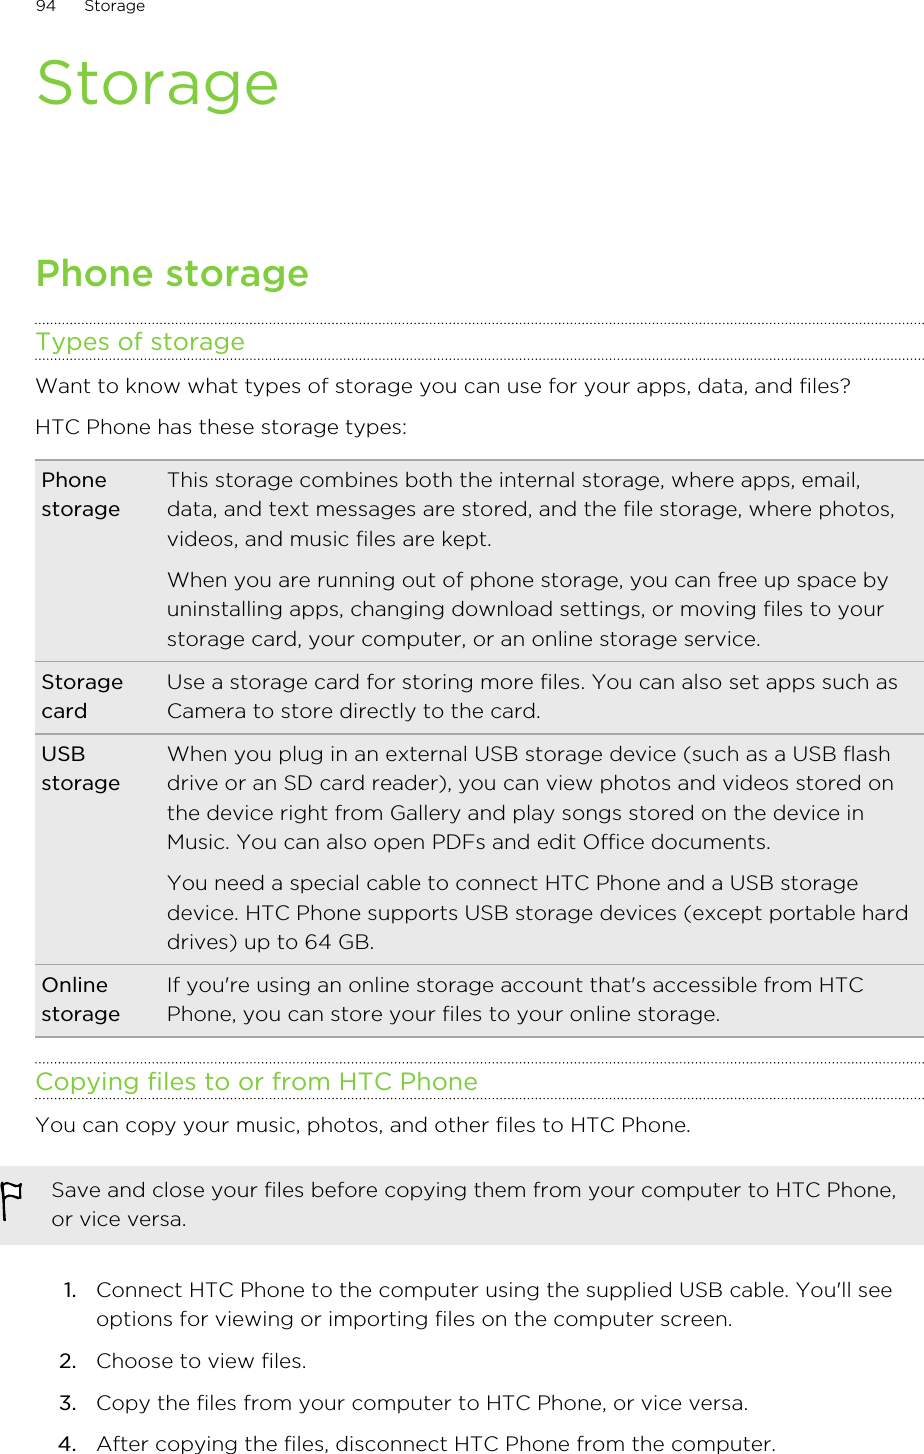 StoragePhone storageTypes of storageWant to know what types of storage you can use for your apps, data, and files?HTC Phone has these storage types:PhonestorageThis storage combines both the internal storage, where apps, email,data, and text messages are stored, and the file storage, where photos,videos, and music files are kept.When you are running out of phone storage, you can free up space byuninstalling apps, changing download settings, or moving files to yourstorage card, your computer, or an online storage service.StoragecardUse a storage card for storing more files. You can also set apps such asCamera to store directly to the card.USBstorageWhen you plug in an external USB storage device (such as a USB flashdrive or an SD card reader), you can view photos and videos stored onthe device right from Gallery and play songs stored on the device inMusic. You can also open PDFs and edit Office documents.You need a special cable to connect HTC Phone and a USB storagedevice. HTC Phone supports USB storage devices (except portable harddrives) up to 64 GB.OnlinestorageIf you&apos;re using an online storage account that&apos;s accessible from HTCPhone, you can store your files to your online storage.Copying files to or from HTC PhoneYou can copy your music, photos, and other files to HTC Phone.Save and close your files before copying them from your computer to HTC Phone,or vice versa.1. Connect HTC Phone to the computer using the supplied USB cable. You&apos;ll seeoptions for viewing or importing files on the computer screen.2. Choose to view files.3. Copy the files from your computer to HTC Phone, or vice versa.4. After copying the files, disconnect HTC Phone from the computer.94 Storage